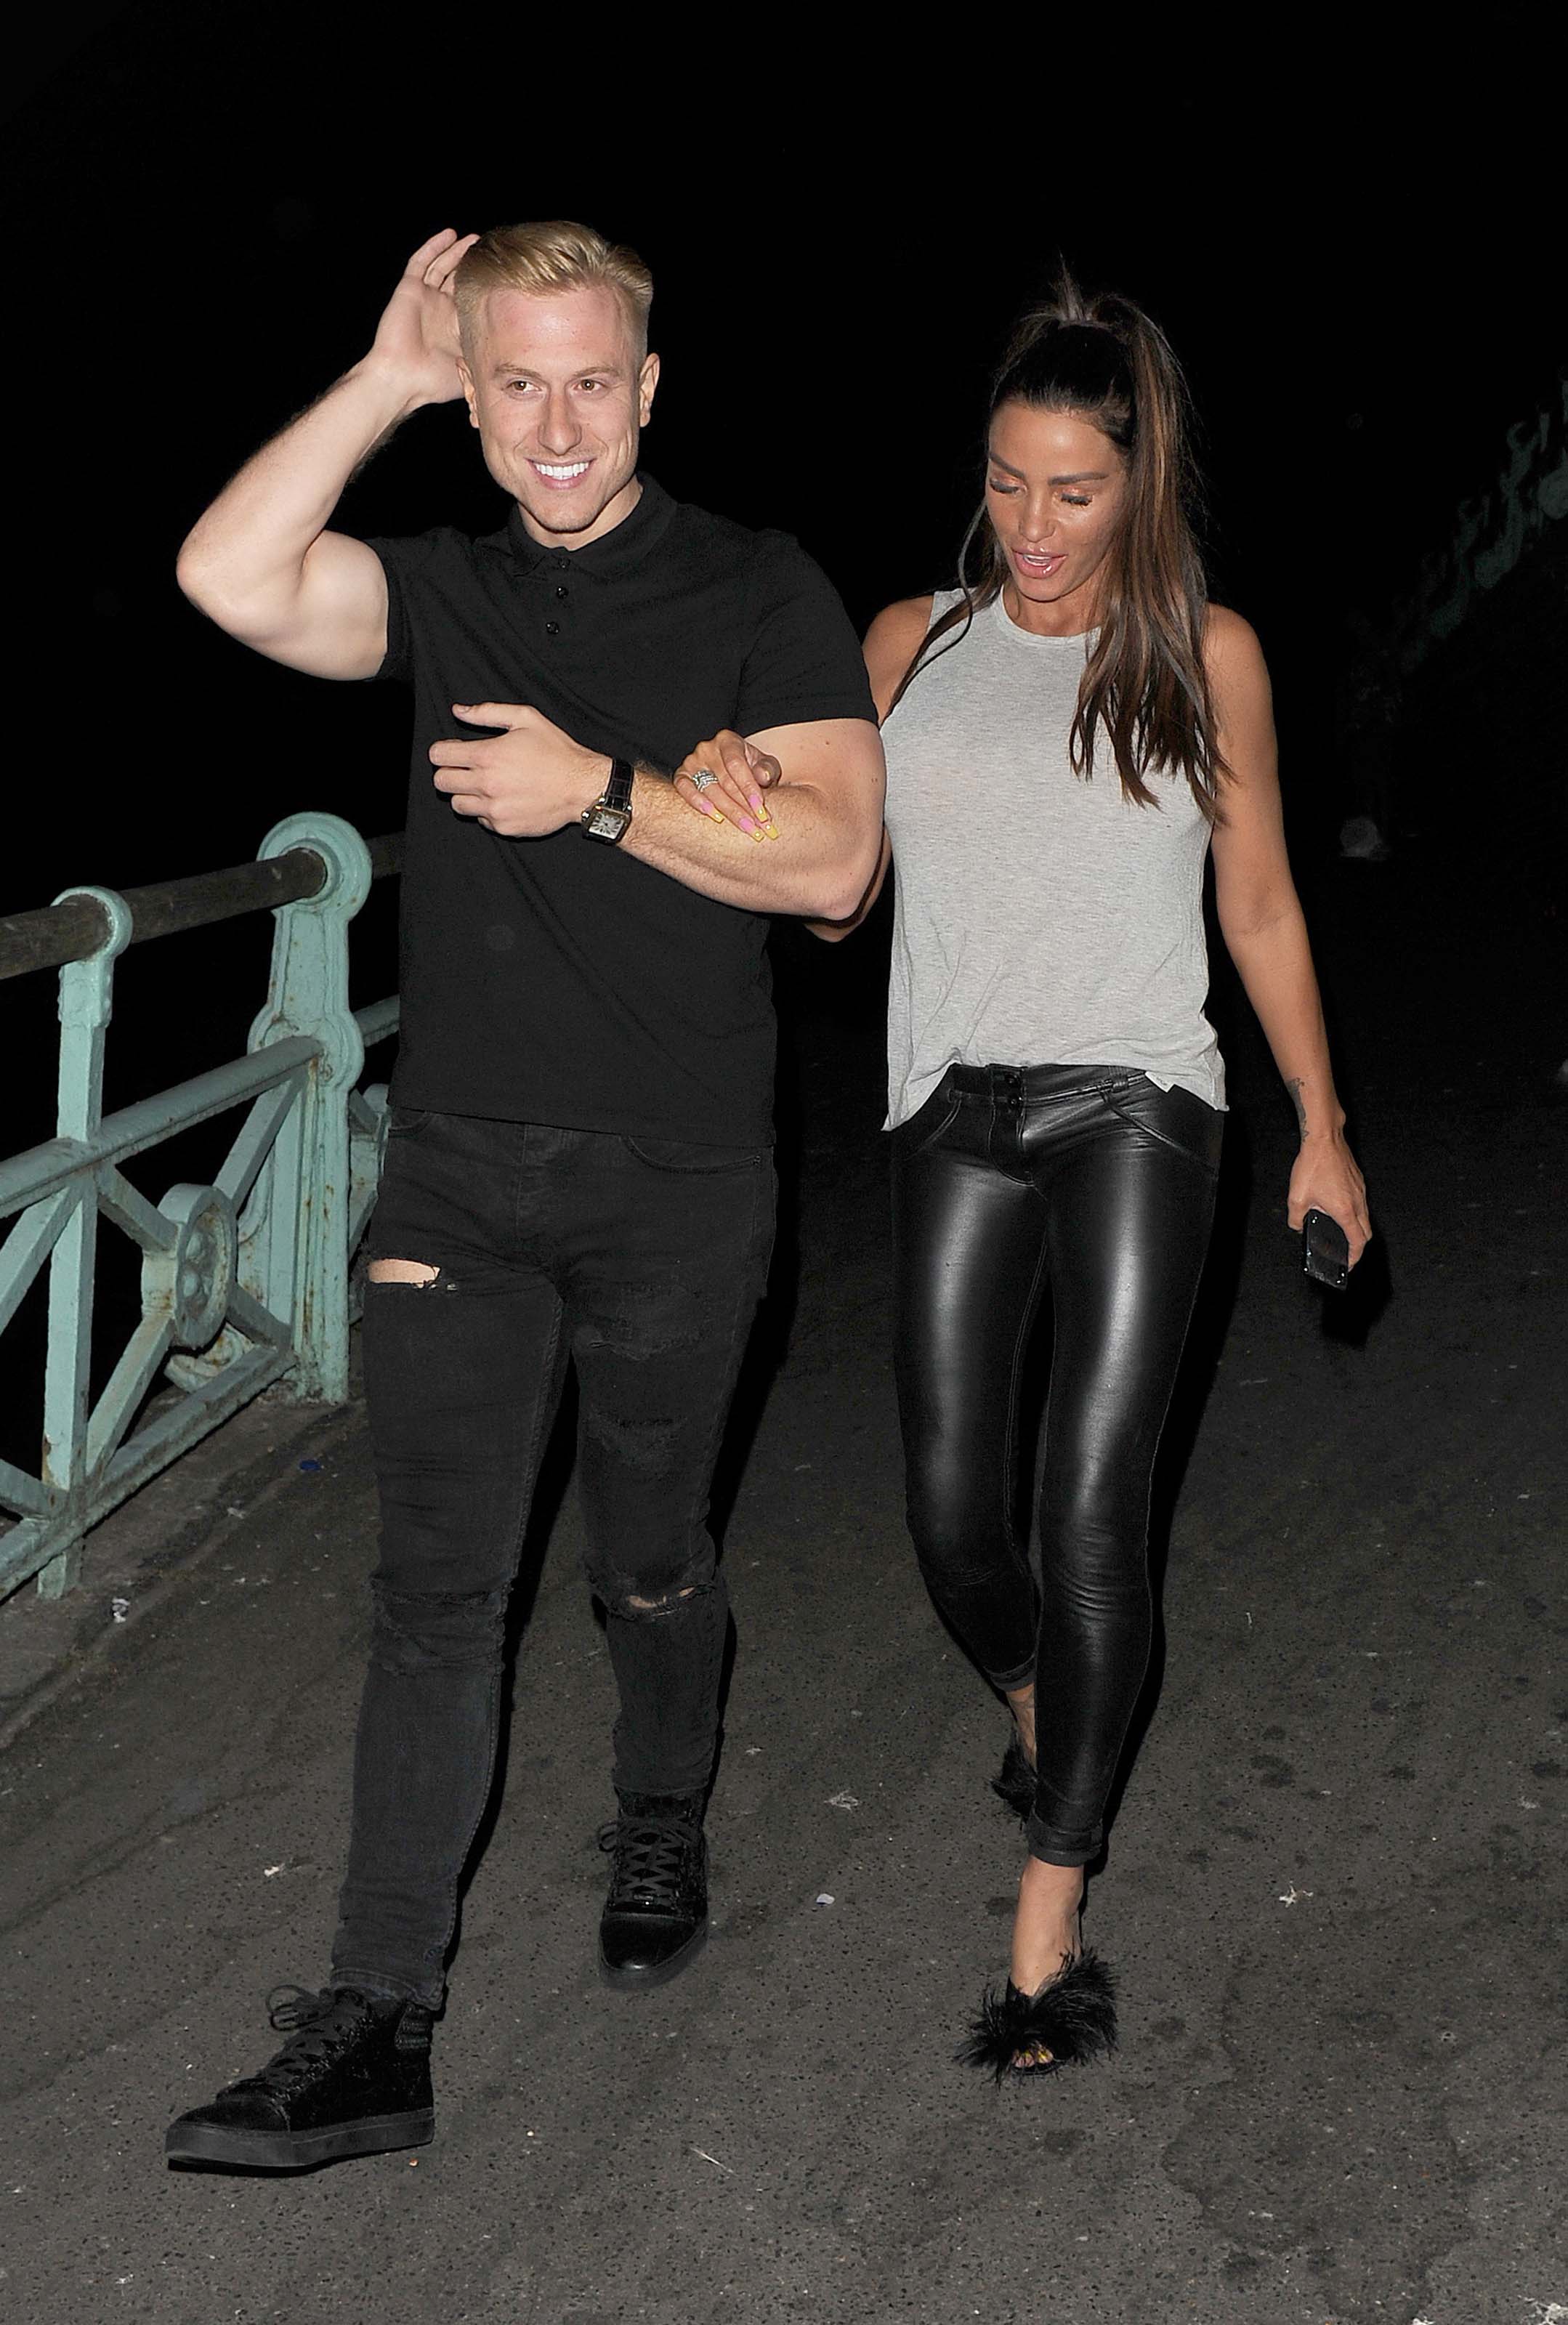 Katie Price seen out and about in Brighton